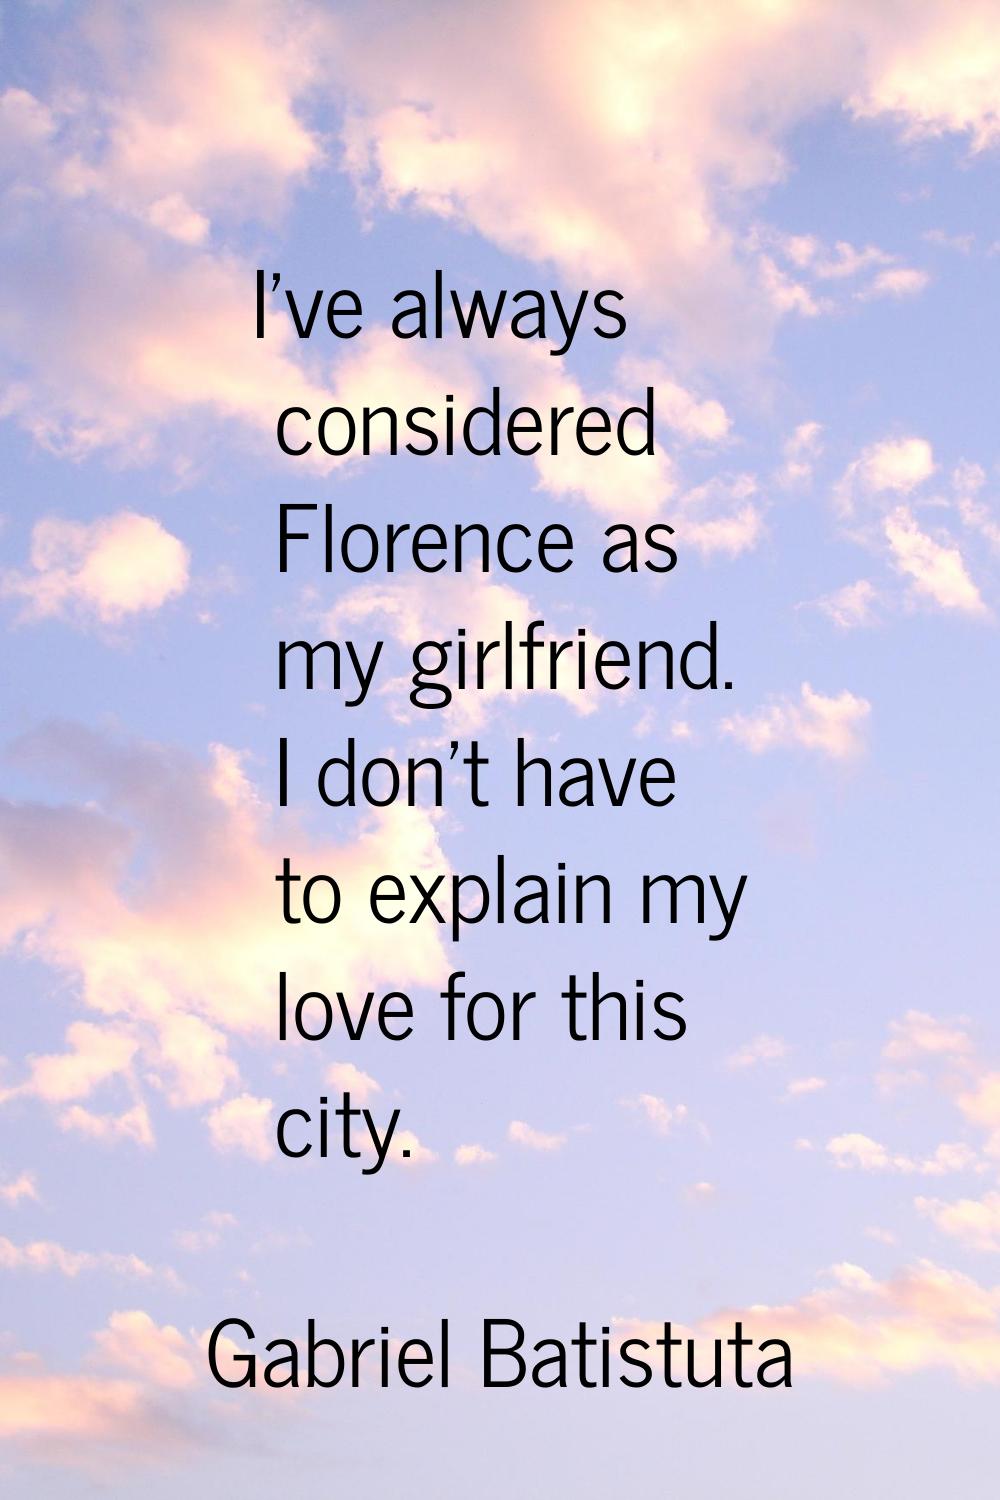 I've always considered Florence as my girlfriend. I don't have to explain my love for this city.